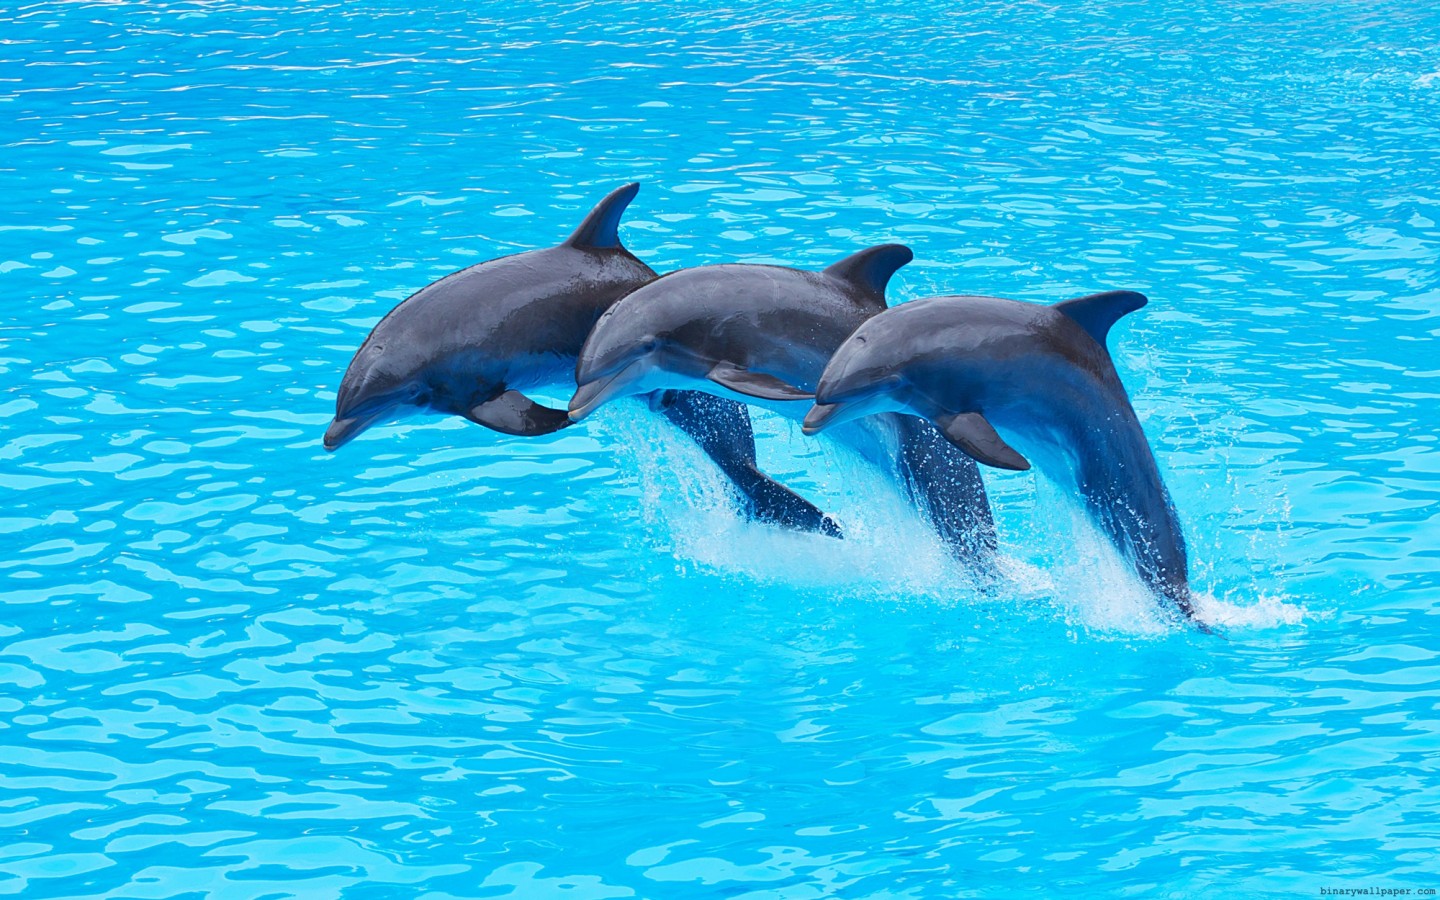 Hd Quality Dolphins Wallpapers, High Quality, Bsnscb - 1440x900 Wallpaper -  